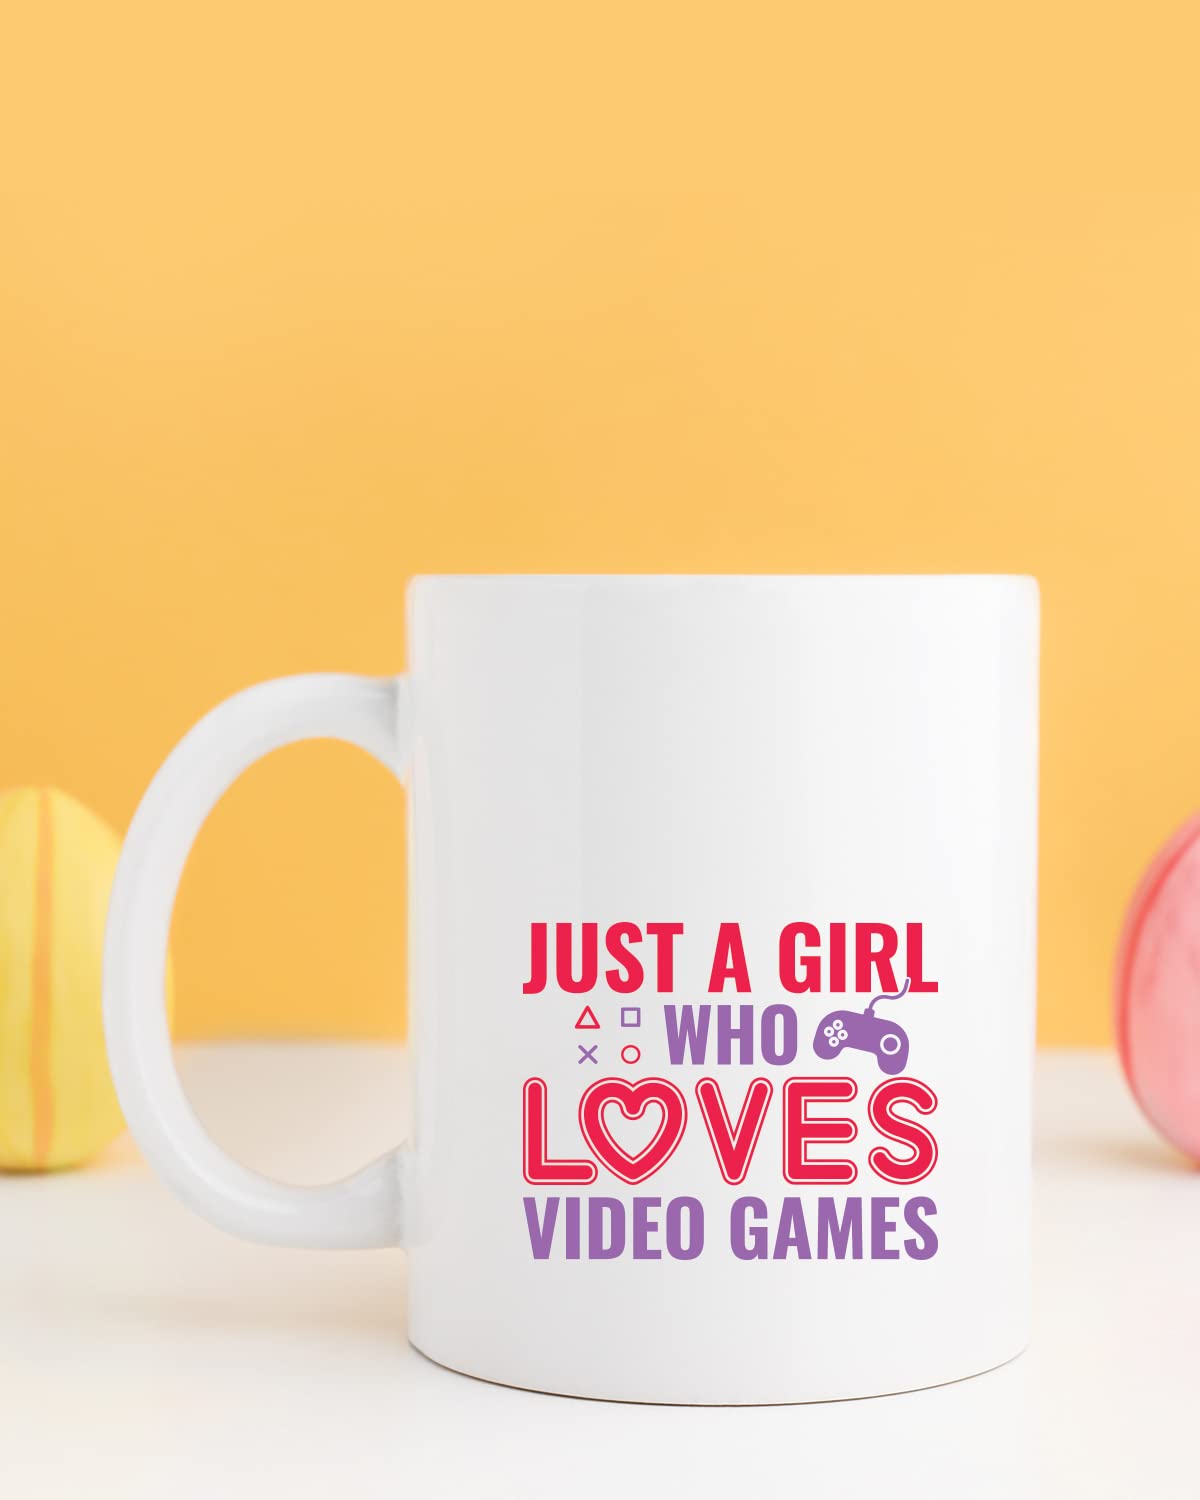 A GIRL WHO LOVES VIDEO GAMES Coffee Mug - Unique Gifts For Game Lovers, Gamer Mugs, Gifts For Gaming Coffee Cup for Husband Boyfriend Birthday, Valentine's Day Gift, Birthday Gift for gamer nerds